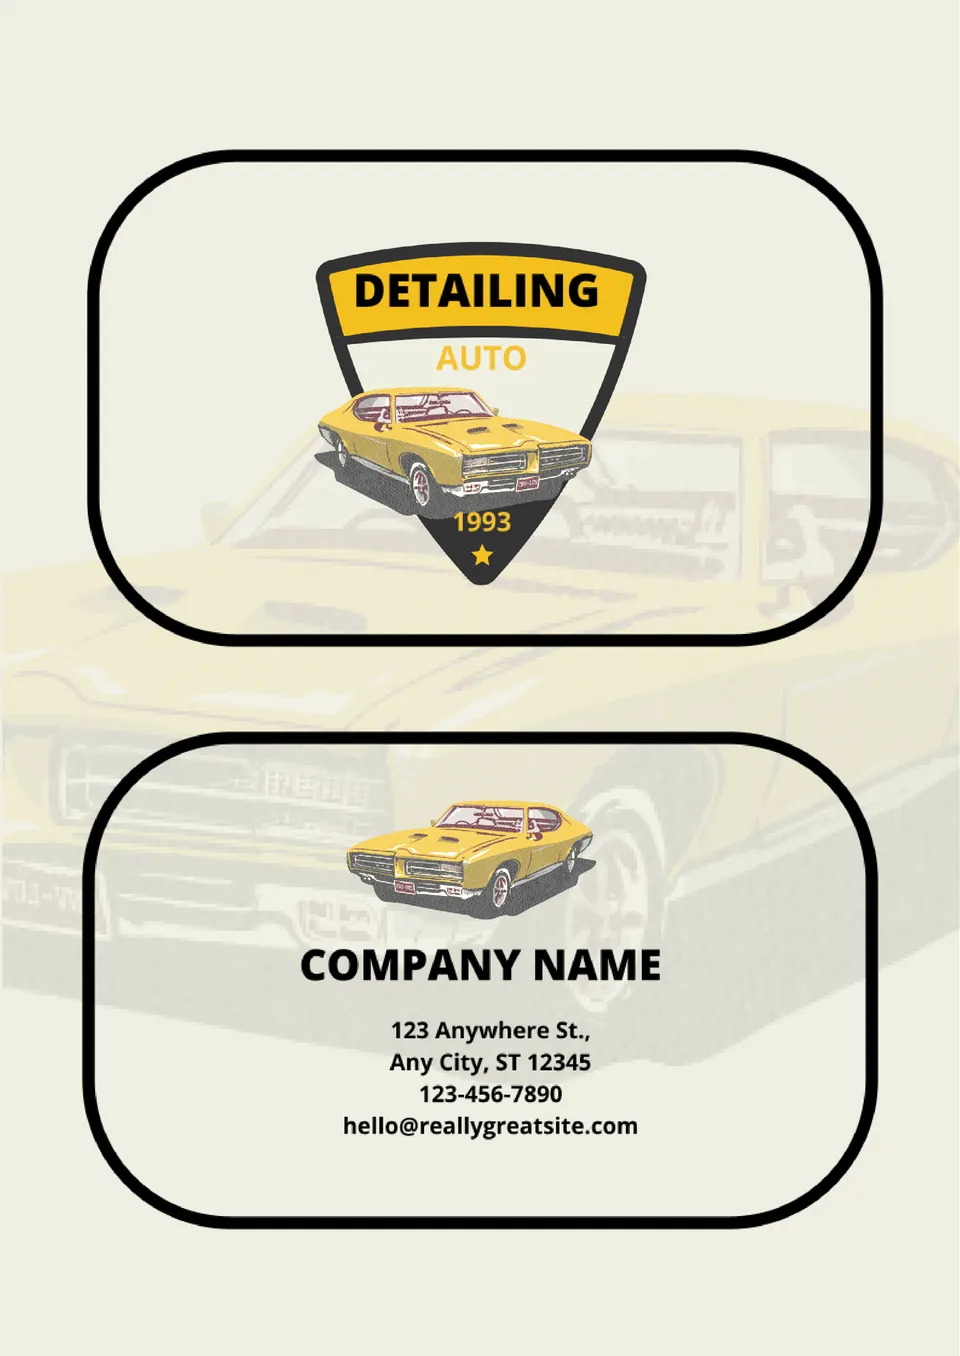 Auto Detailing Business Card Template